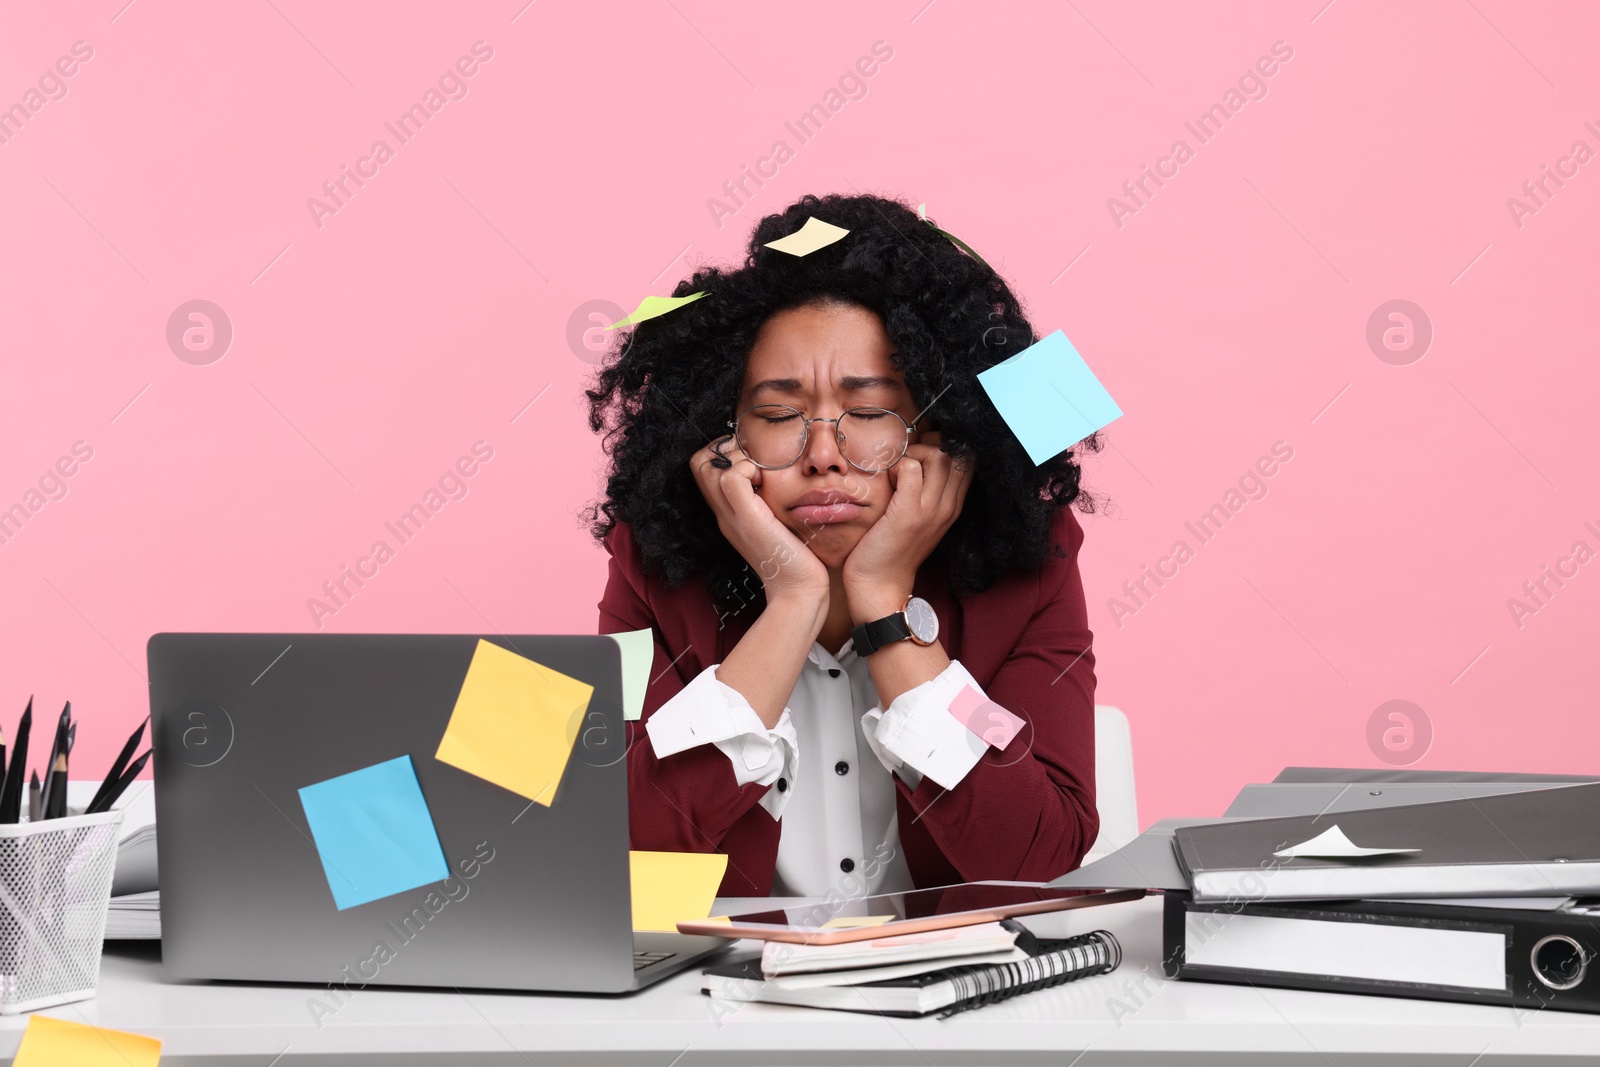 Photo of Stressful deadline. Exhausted woman sitting at white desk against pink background. Sticky notes everywhere as reminders